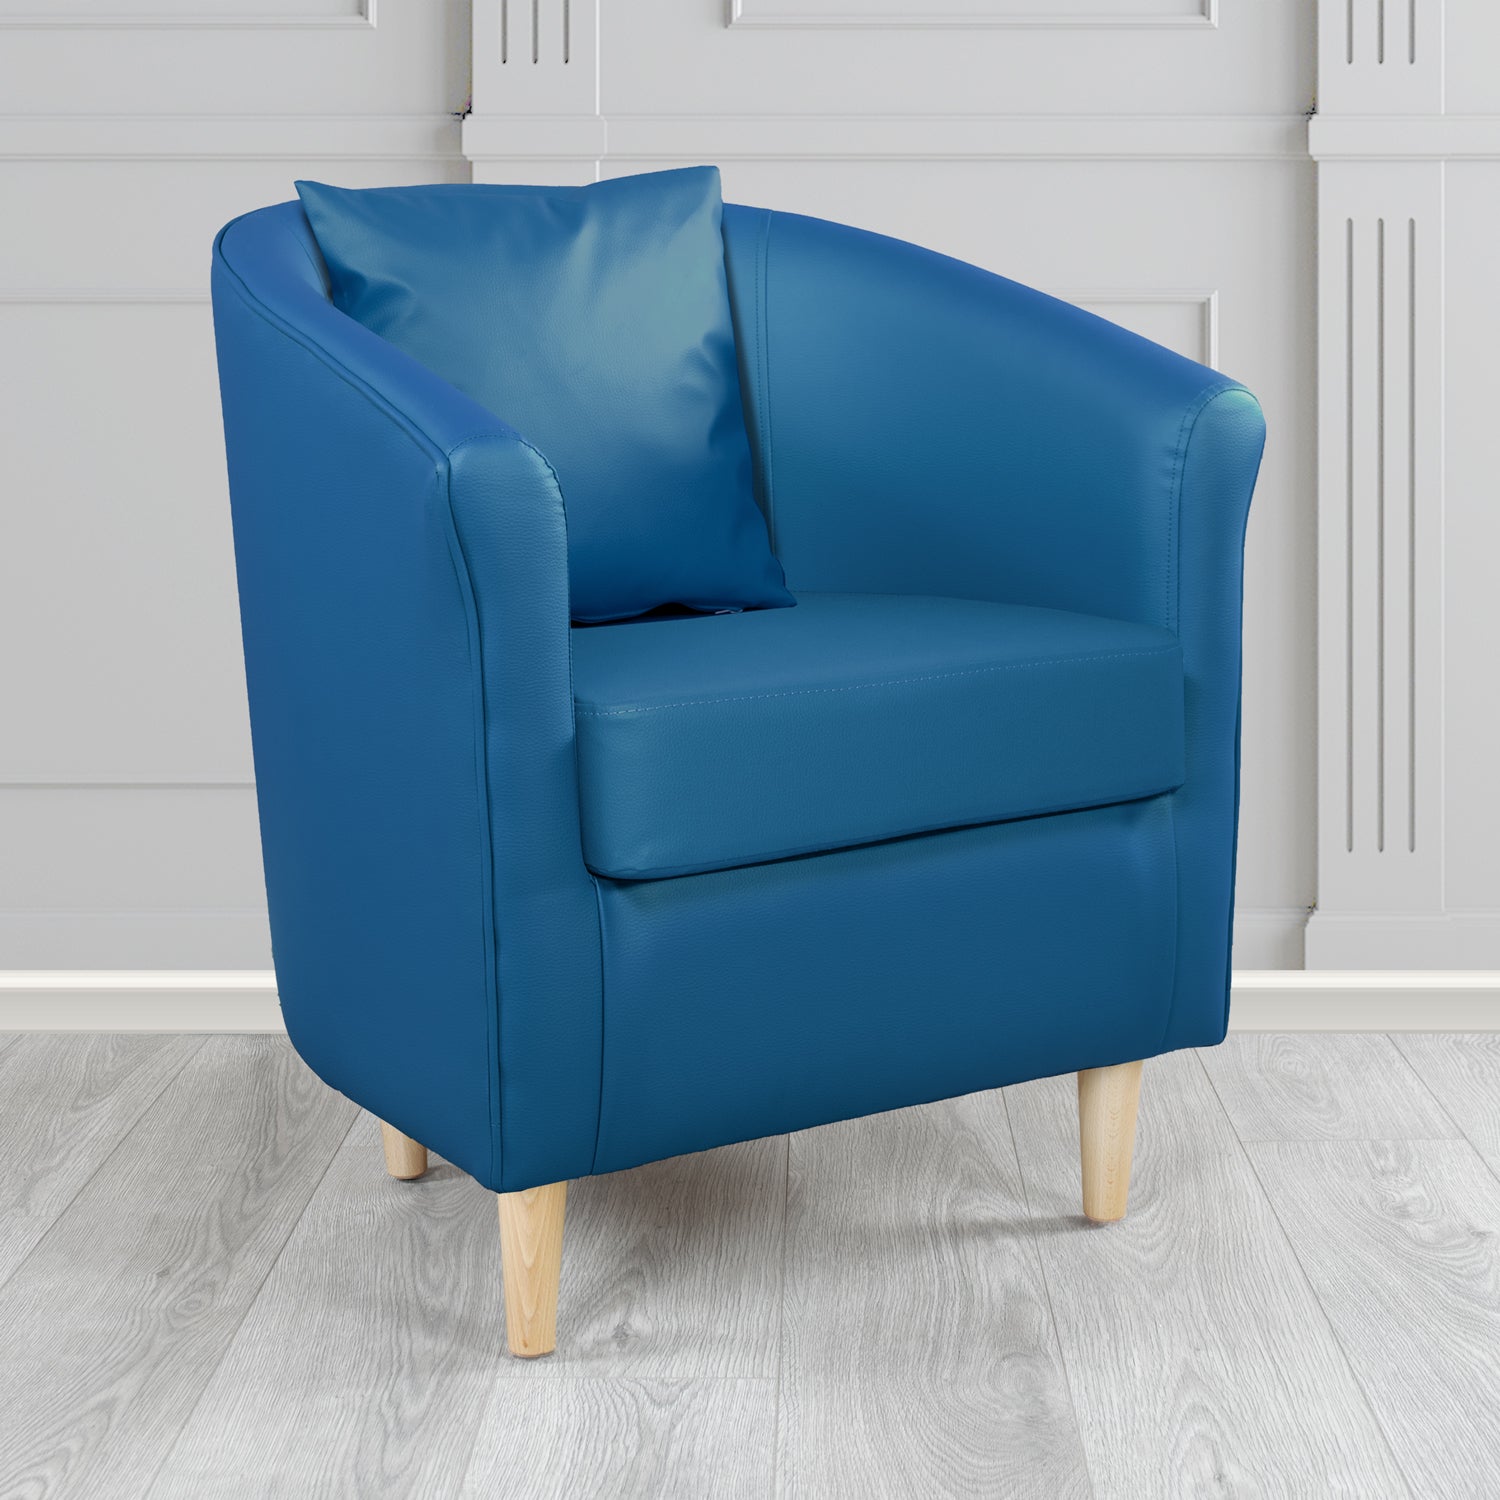 St Tropez Tub Chair with Scatter Cushion in Madrid Royal Faux Leather - The Tub Chair Shop